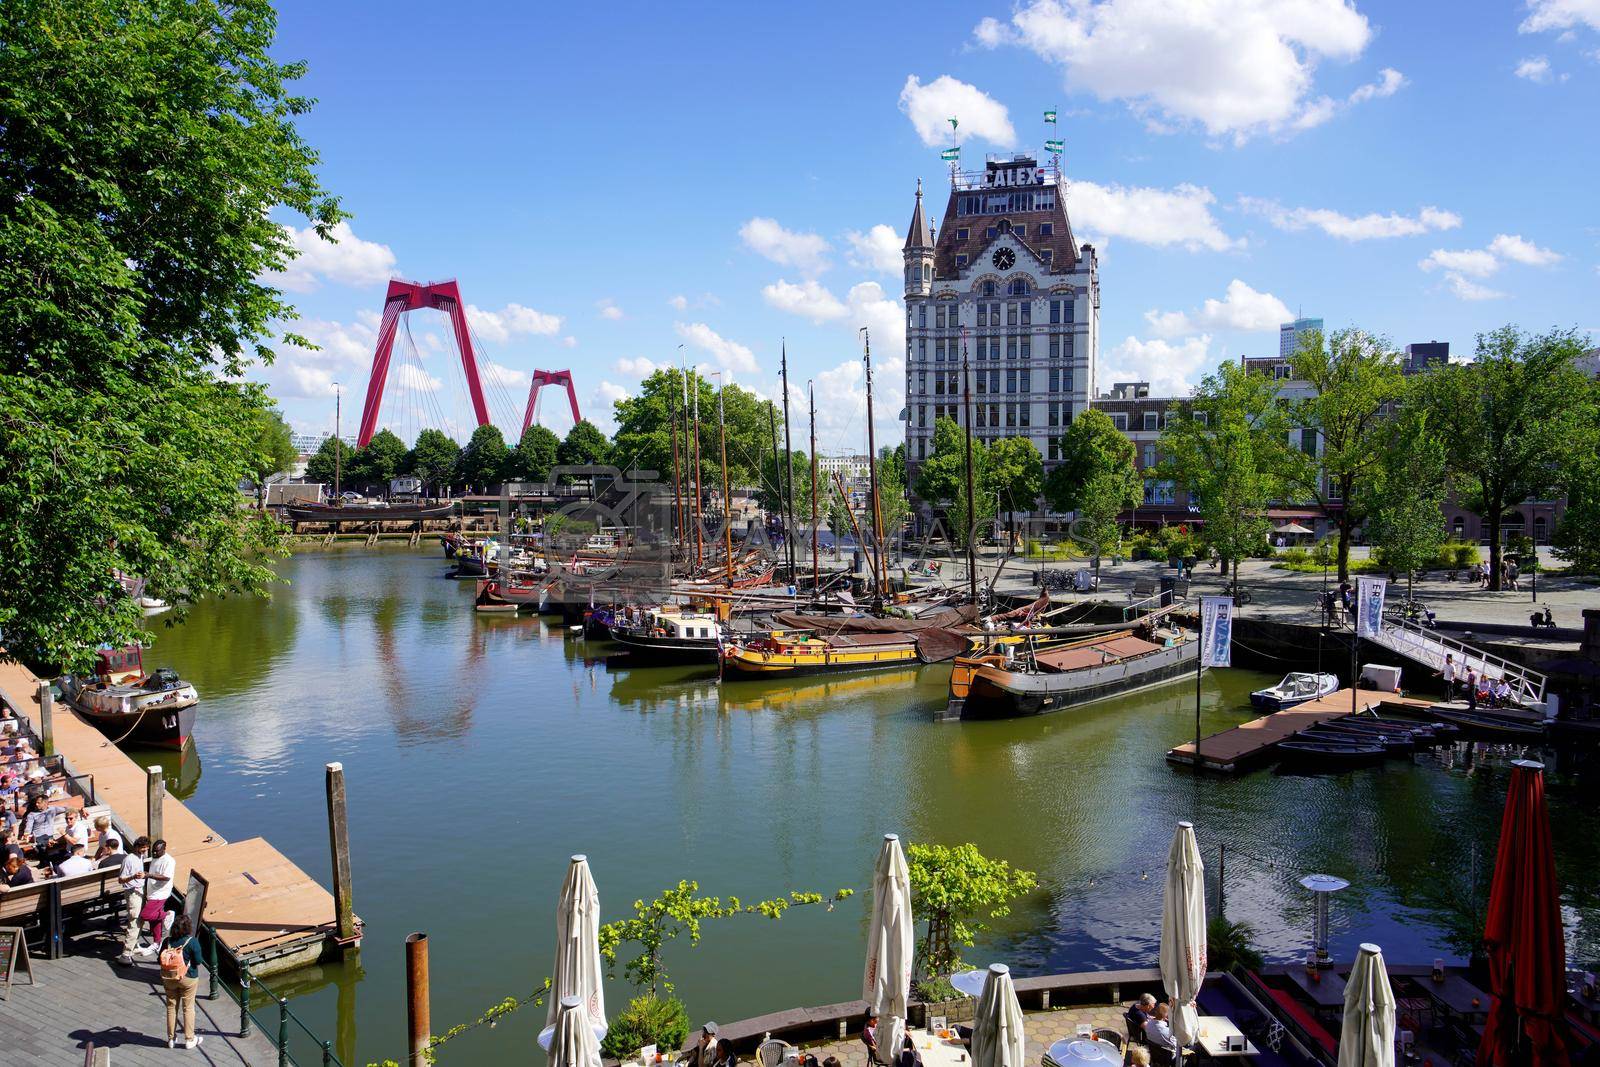 ROTTERDAM, NETHERLANDS - JUNE 9, 2022: Oude Haven, one of the oldest ports of Rotterdam with Witte Huis building and Willemsbrug bridge, Netherlands